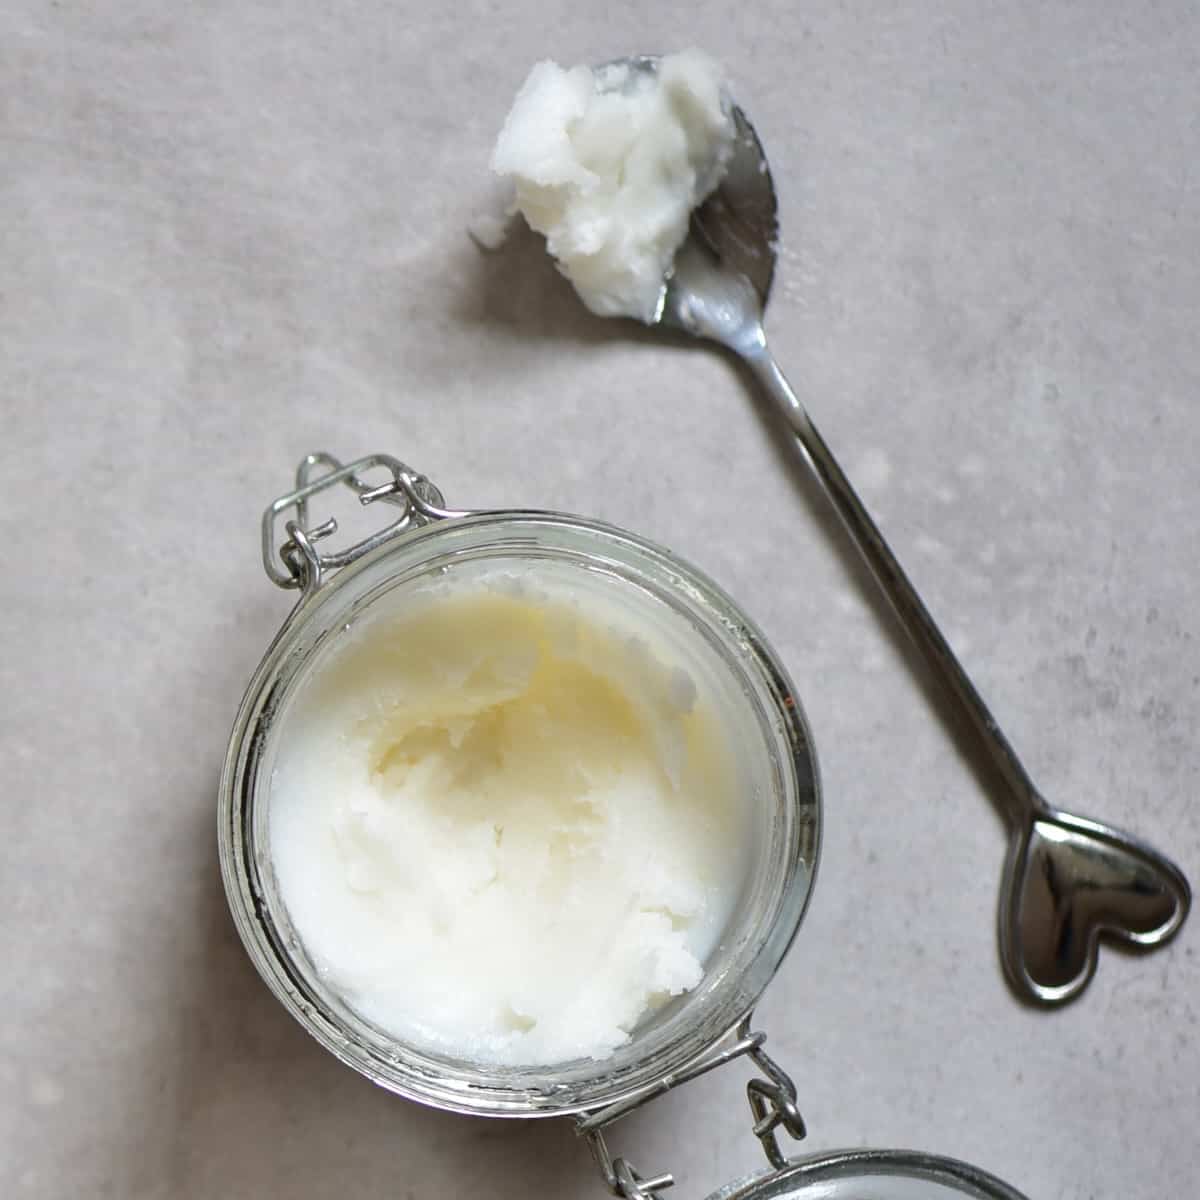 A jar with homemade coconut oil and a spoon next to it